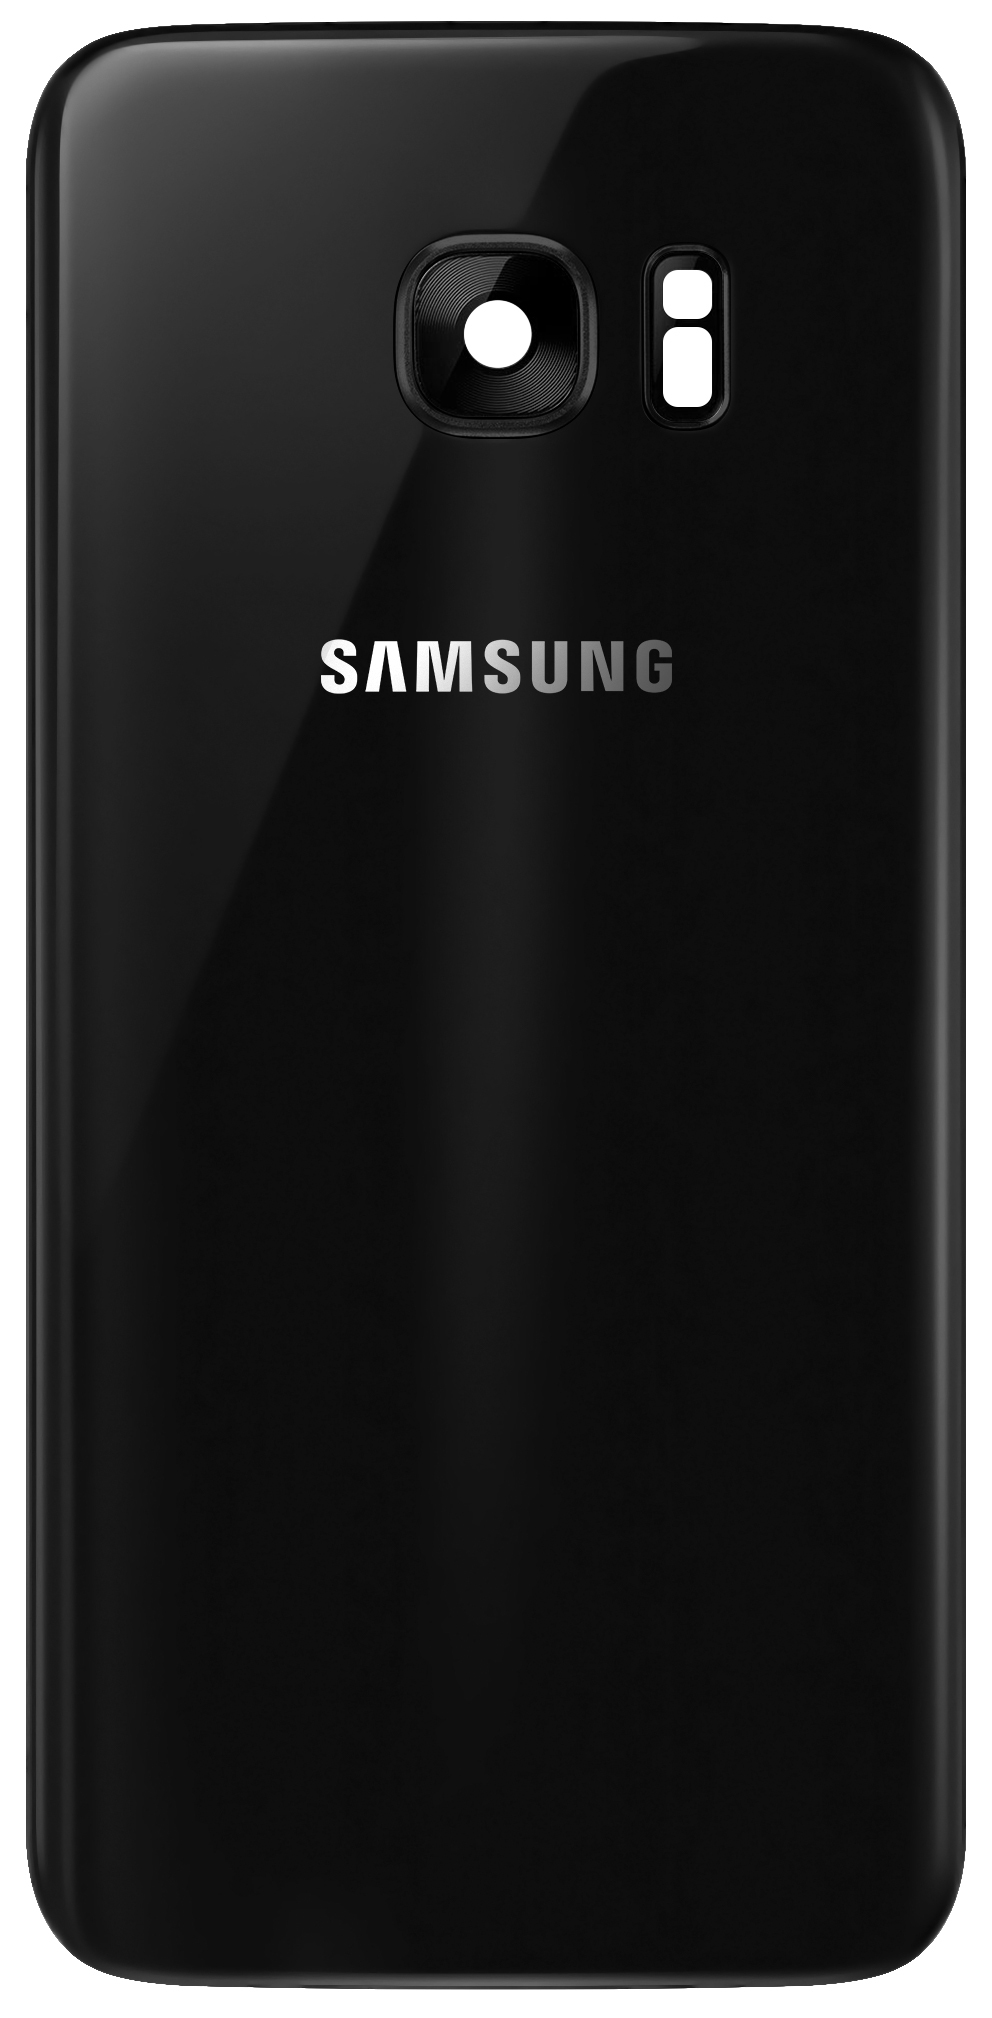 battery-cover-for-samsung-galaxy-s7-g930-2C-black-